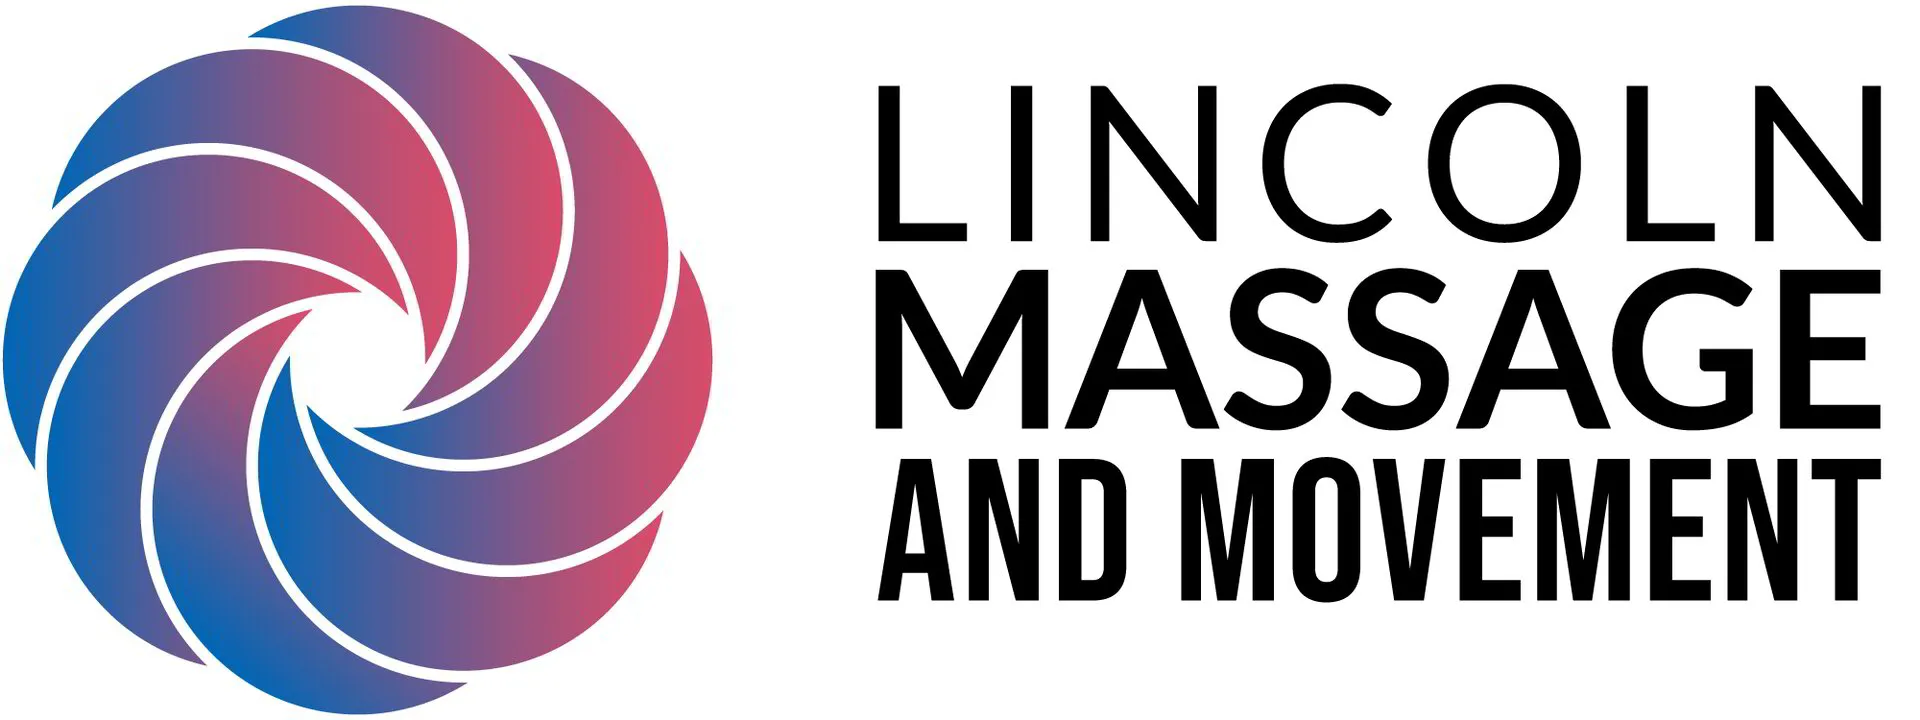 Lincoln Massage and Movement